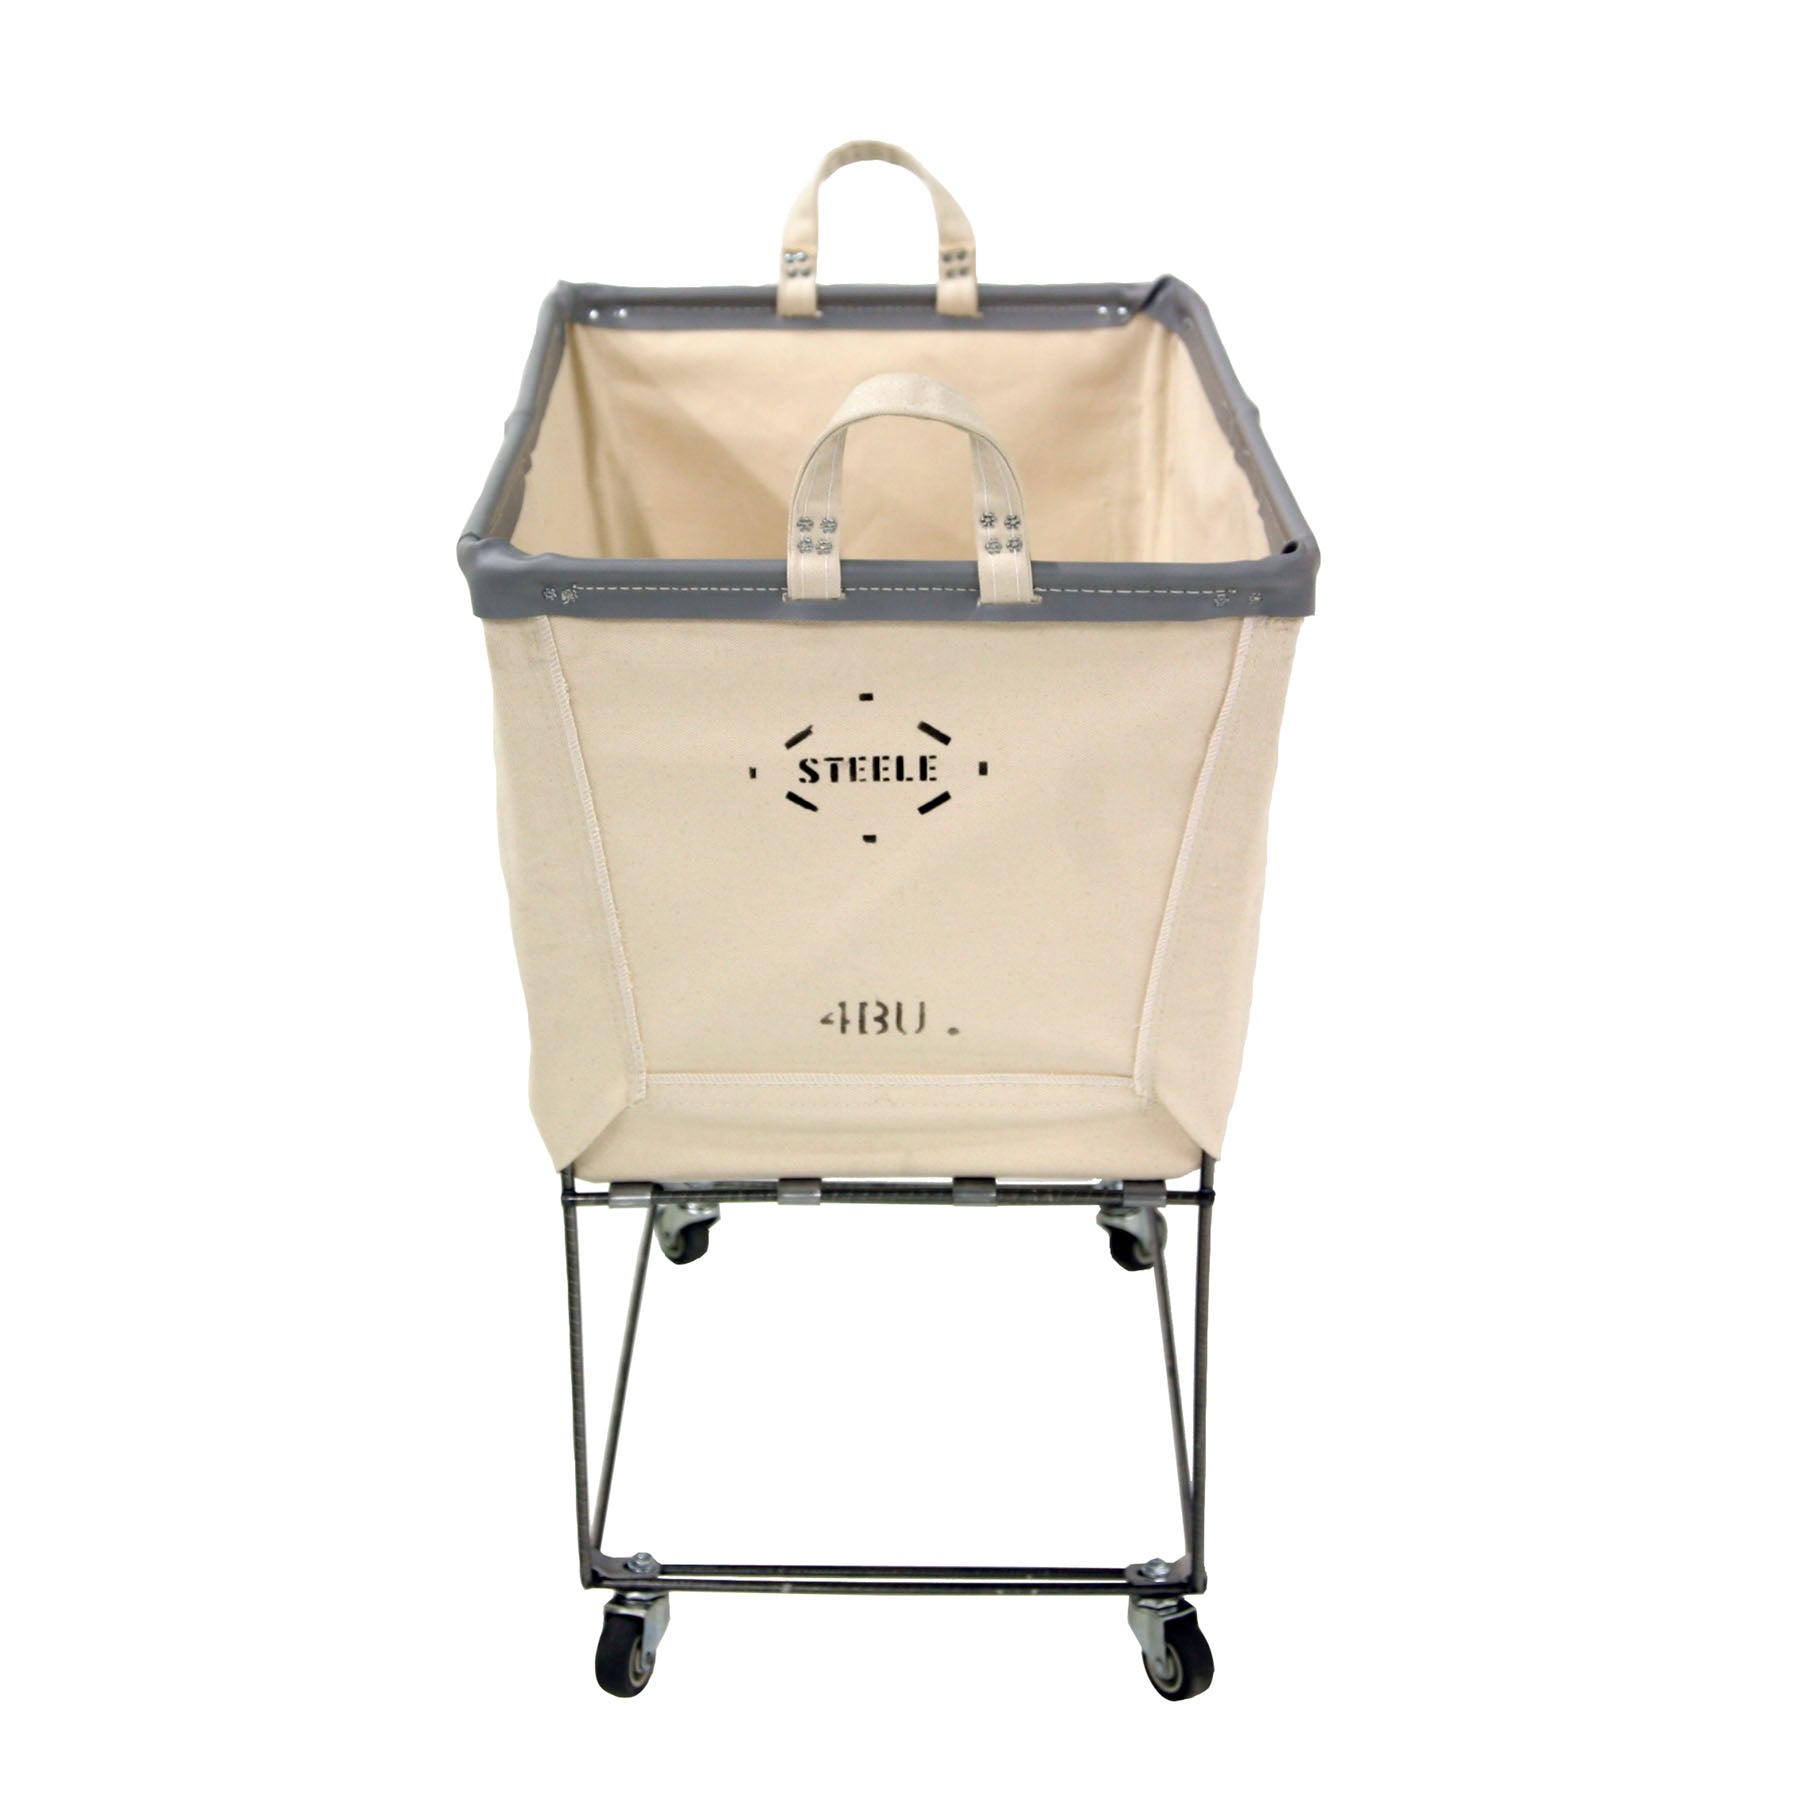 Metal Rectangular Cart/Laundry Basket with Mesh Sides and 4 Casters Coated,  Red - 35 x 28 x 16 - Bunting Online Auctions